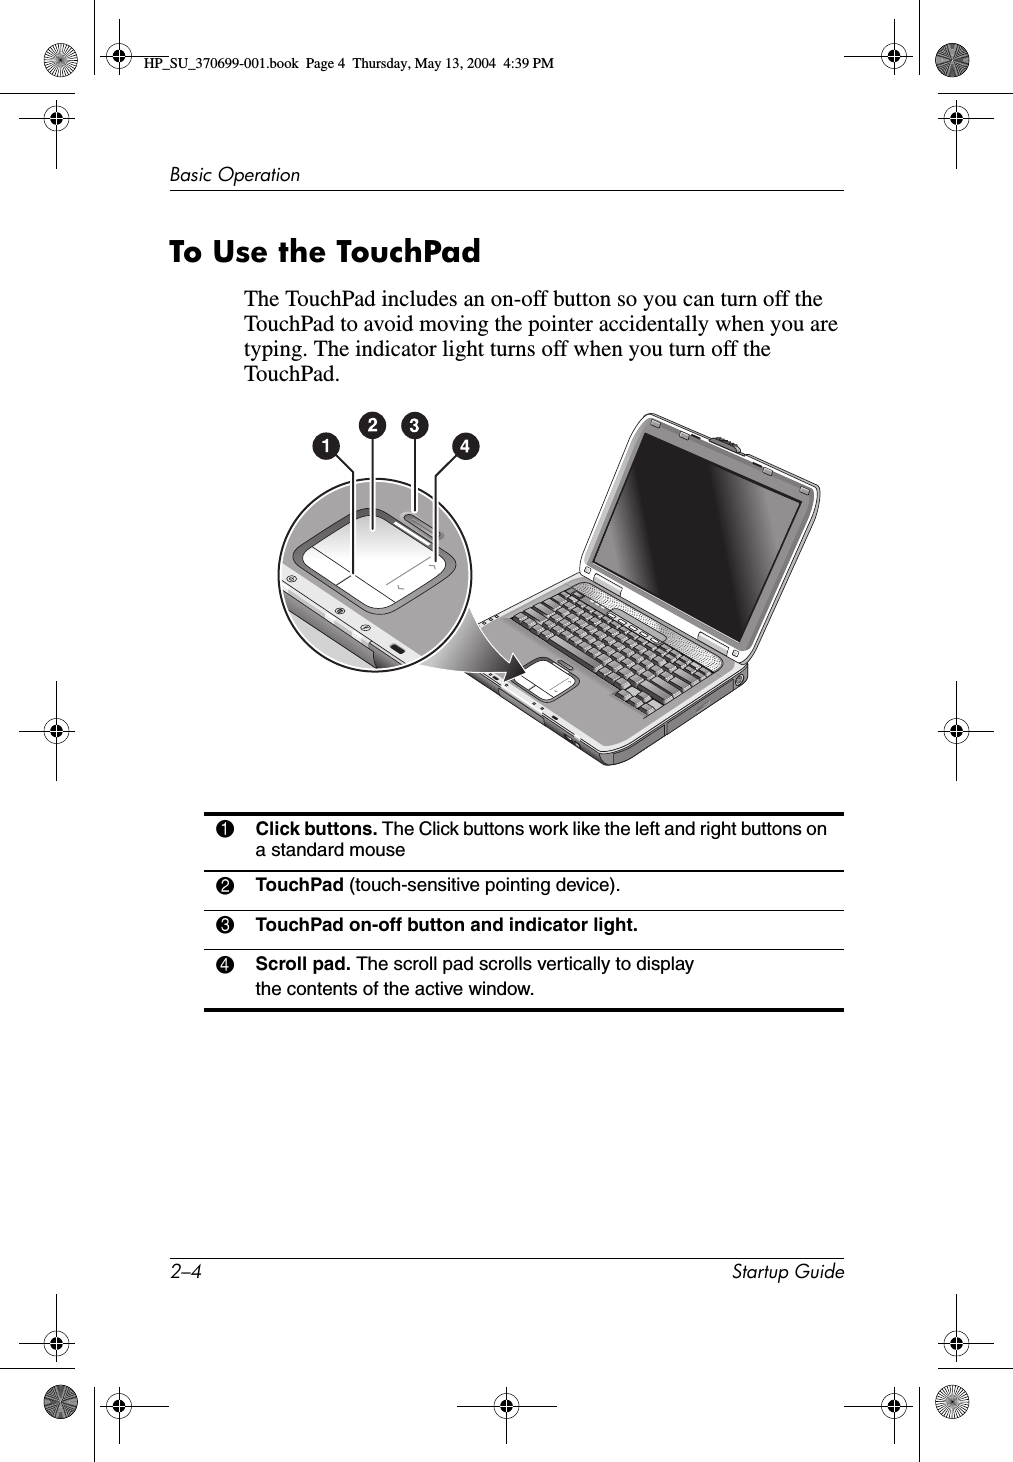 2–4 Startup GuideBasic OperationTo Use the TouchPadThe TouchPad includes an on-off button so you can turn off the TouchPad to avoid moving the pointer accidentally when you are typing. The indicator light turns off when you turn off the TouchPad.1Click buttons. The Click buttons work like the left and right buttons on a standard mouse2TouchPad (touch-sensitive pointing device).3TouchPad on-off button and indicator light.4Scroll pad. The scroll pad scrolls vertically to display the contents of the active window.HP_SU_370699-001.book  Page 4  Thursday, May 13, 2004  4:39 PM